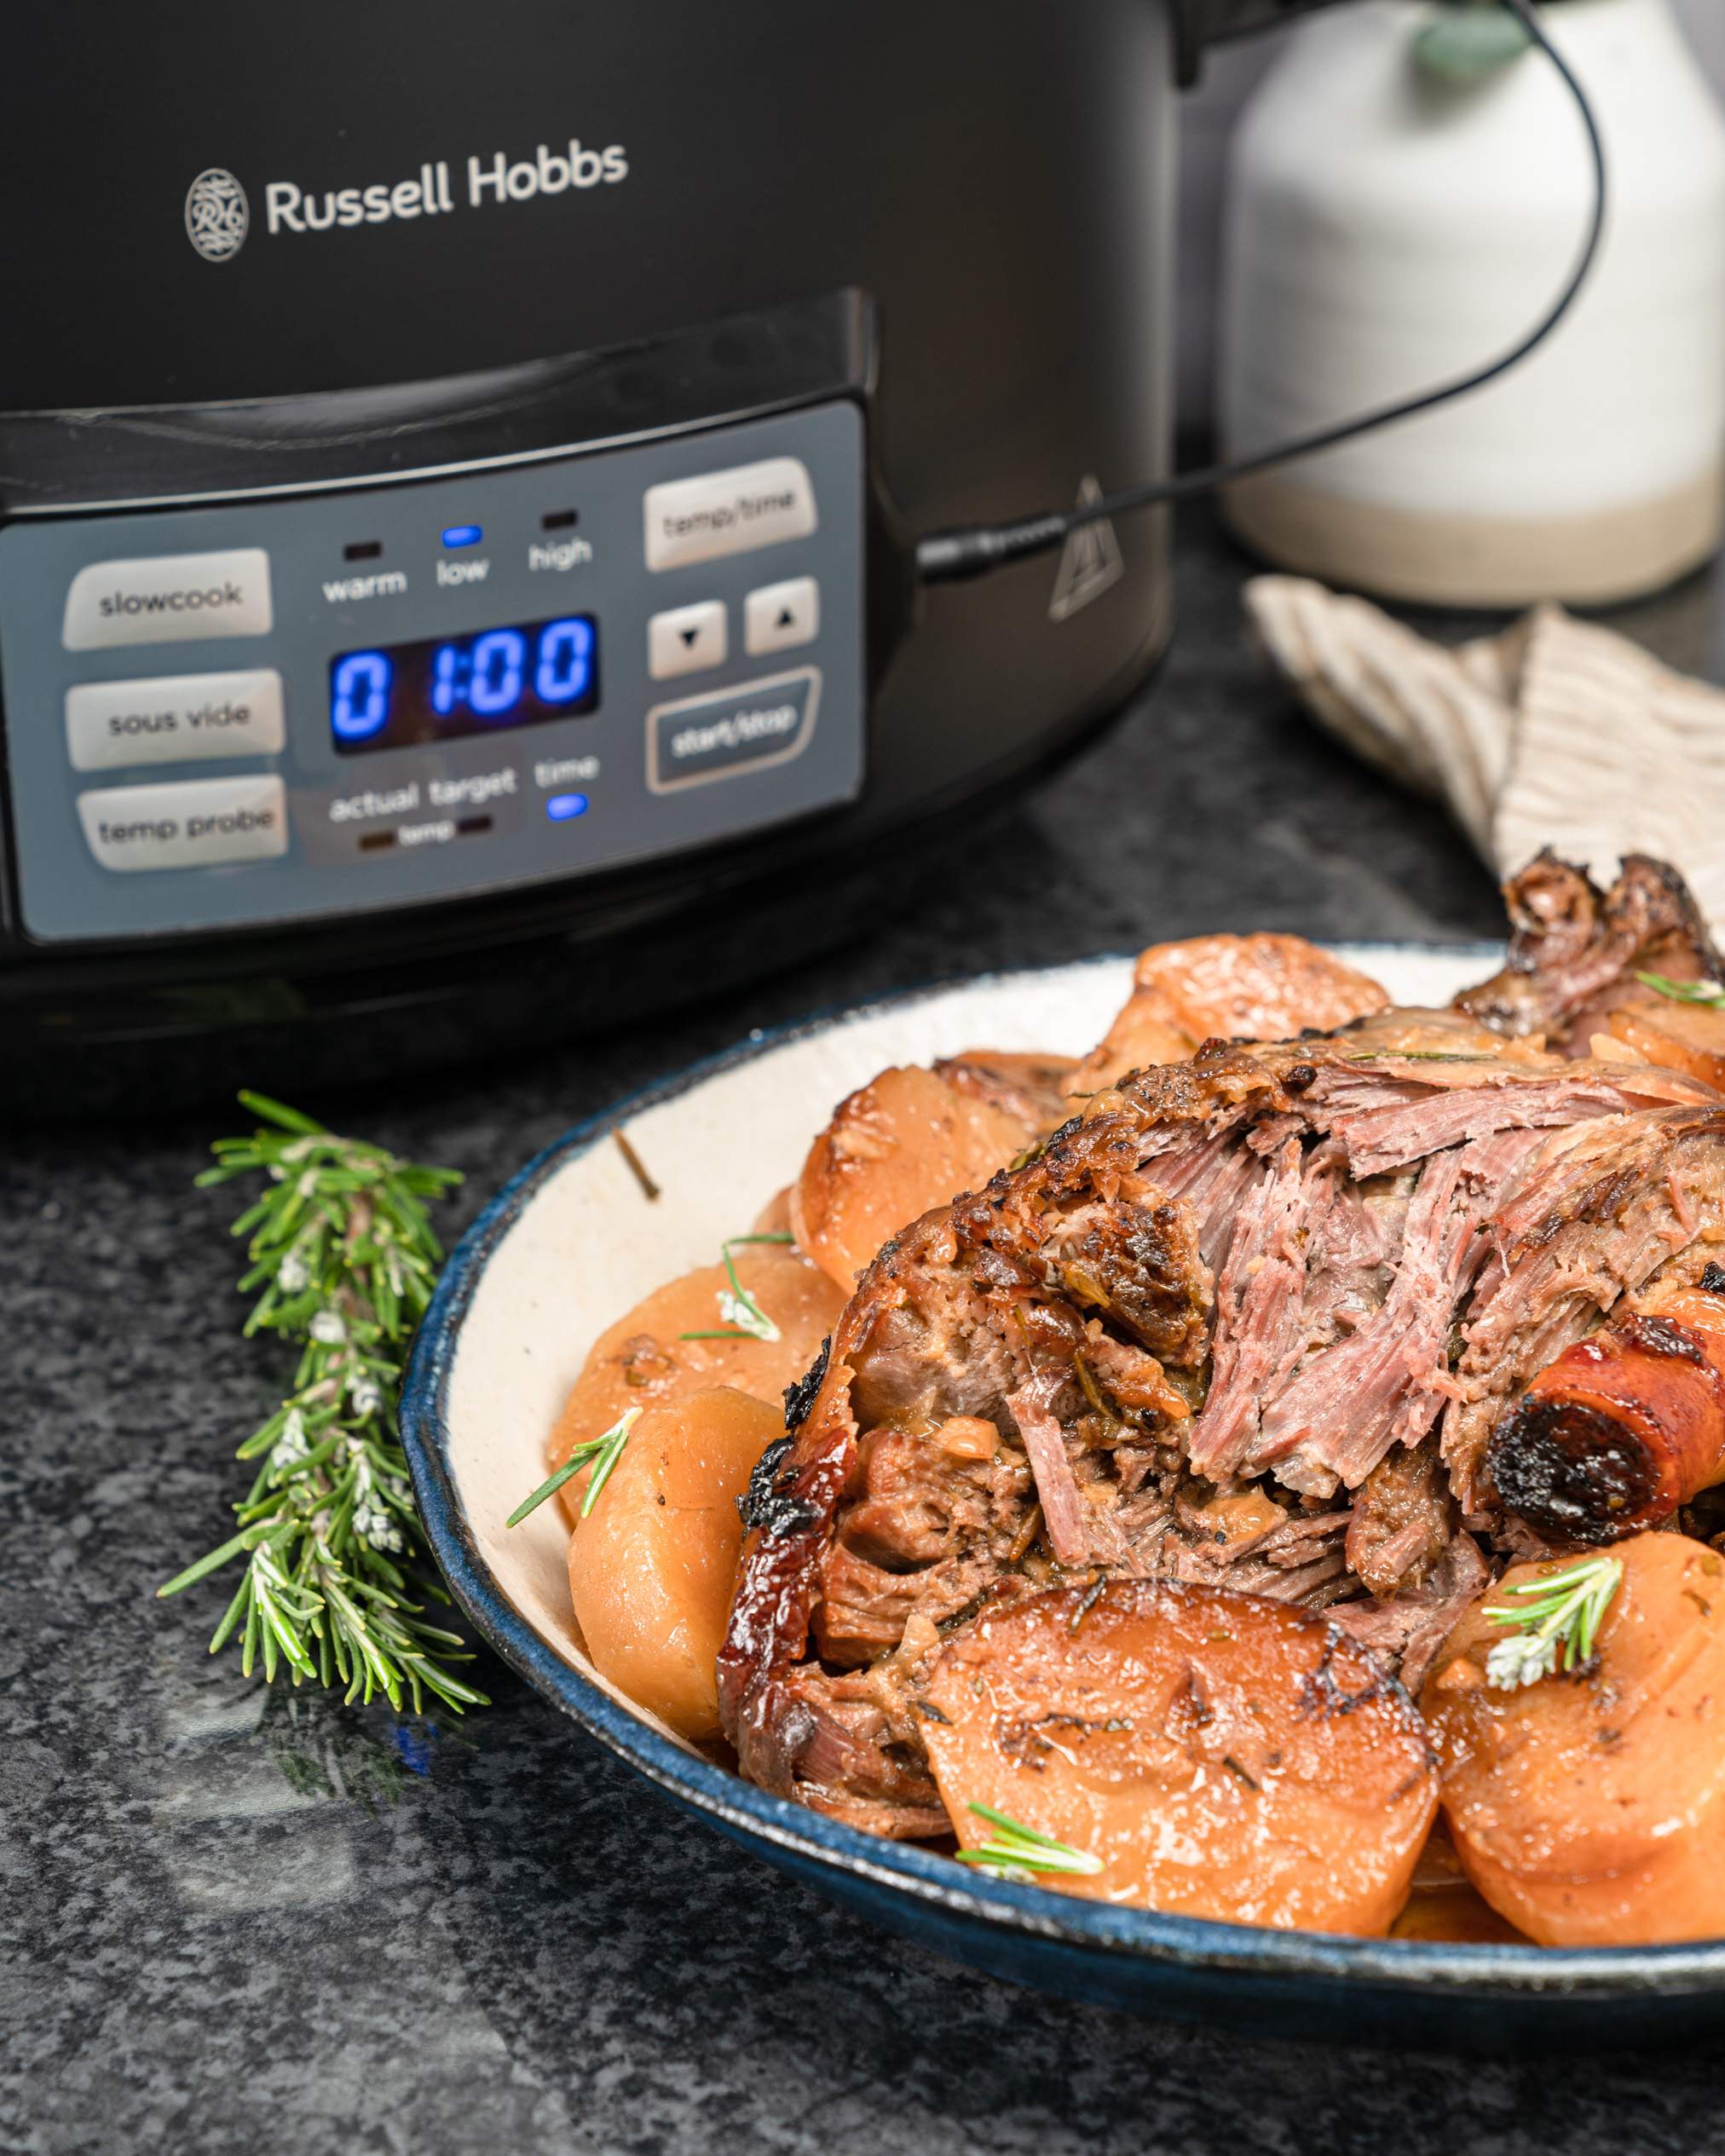 How to Sous Vide? With the Russell Hobbs Master Slow Cooker & Sous Vide